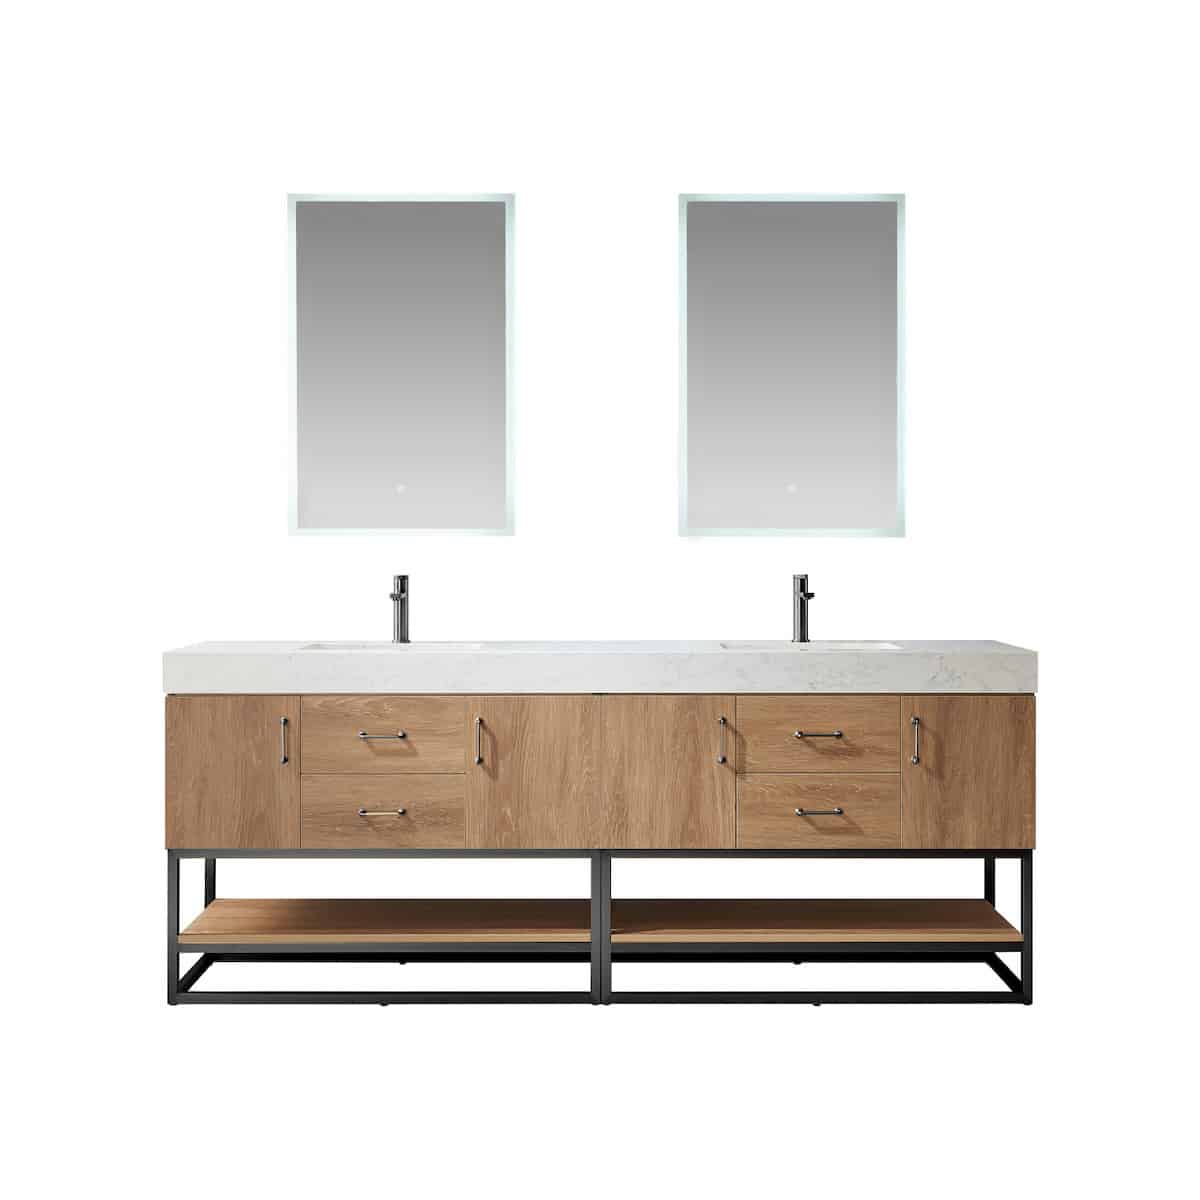 Vinnova Alistair 84 Inch Freestanding Double Vanity in North American Oak and Matte Black Frame with White Grain Stone Countertop With Mirrors 789084B-NO-GW